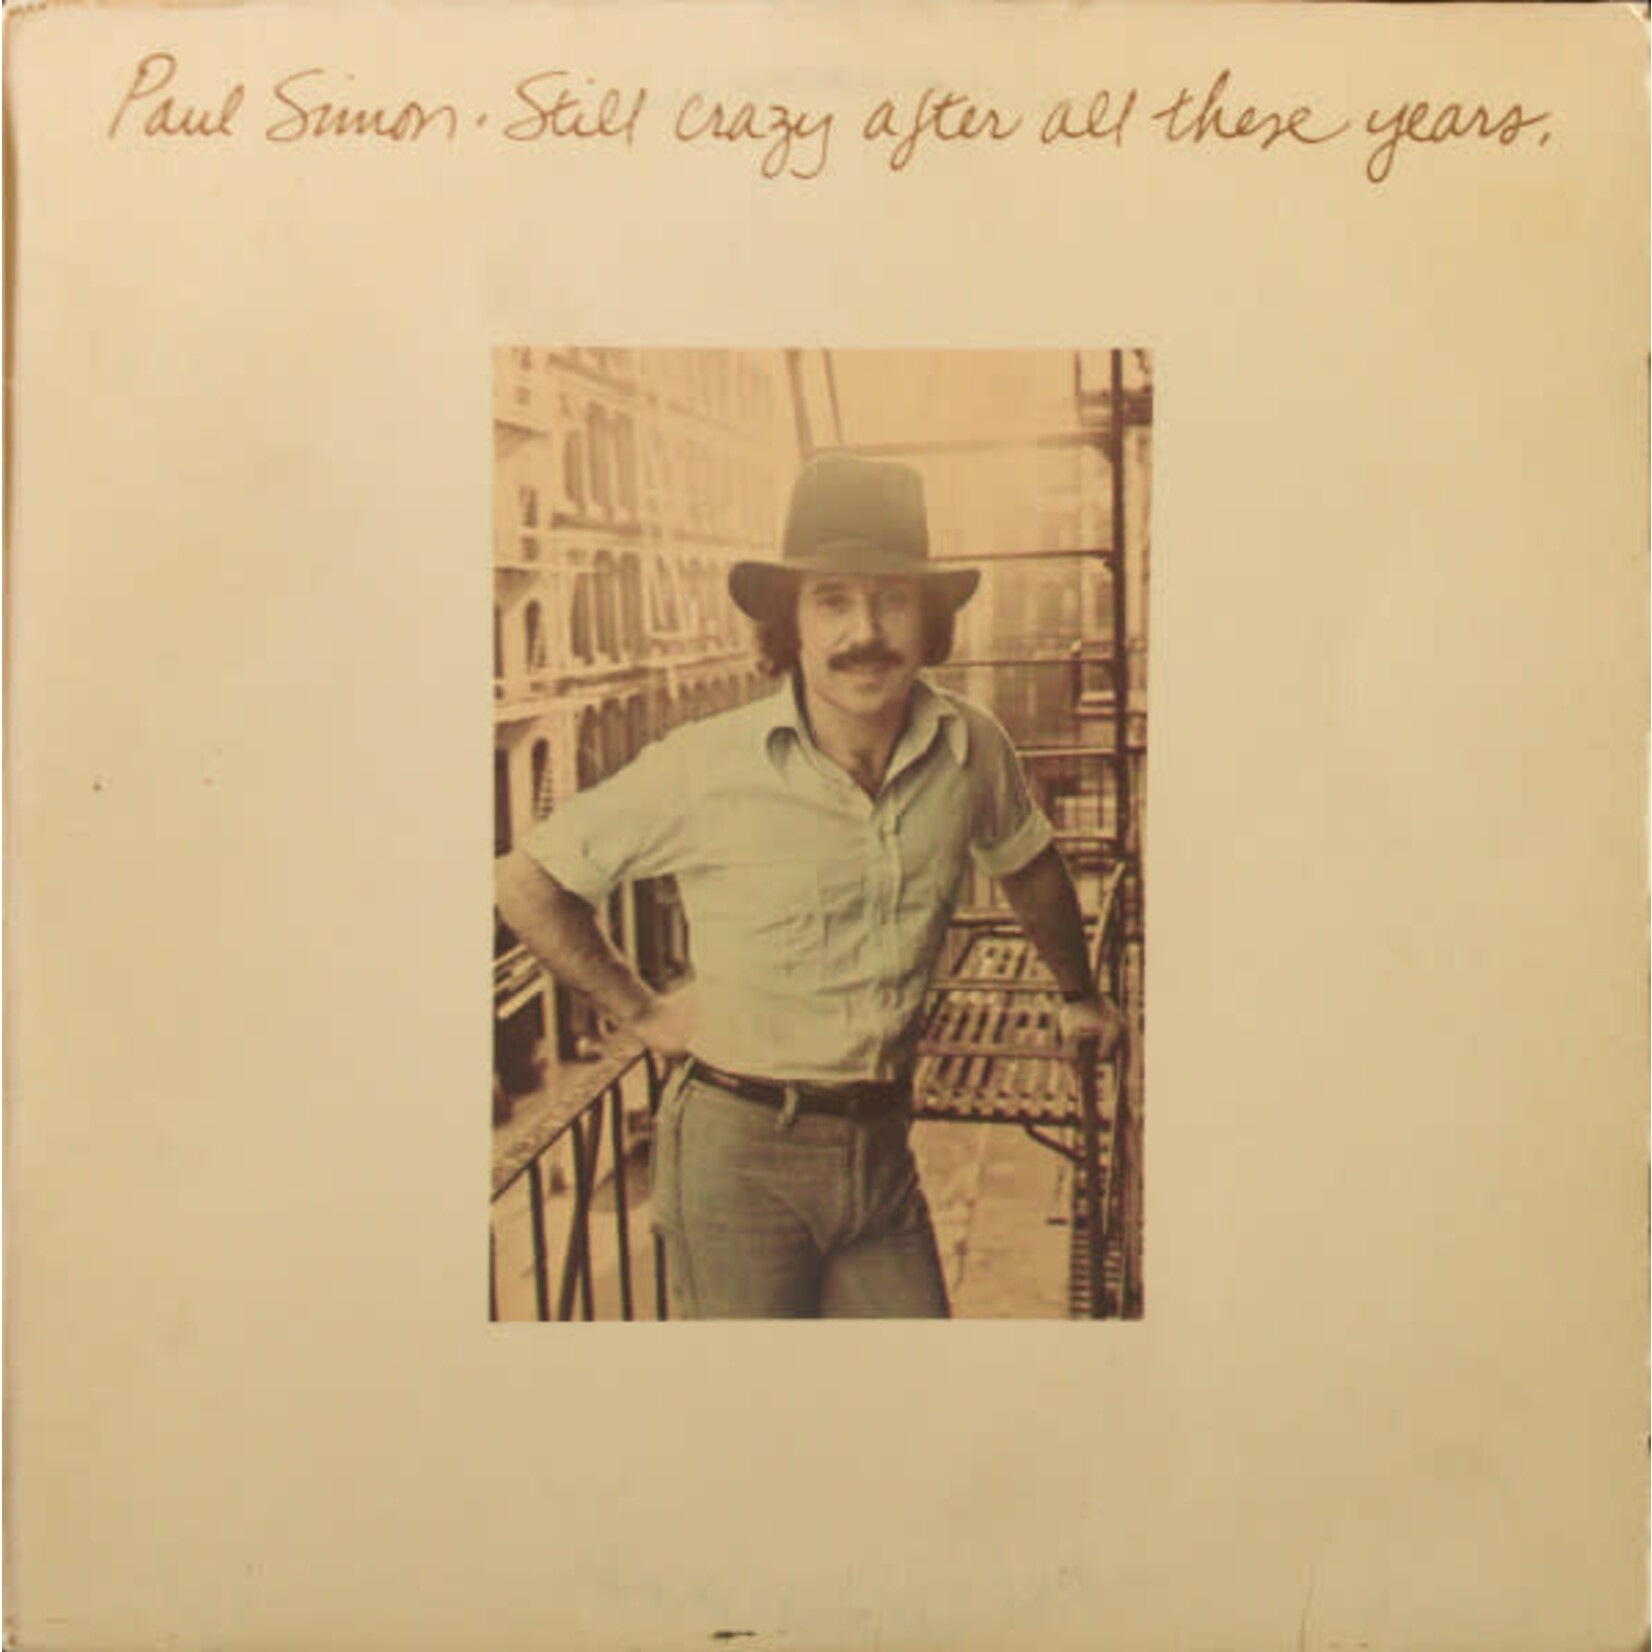 Paul Simon Paul Simon – Still Crazy After All These Years (VG, 1975, LP, Columbia – PC 33540)